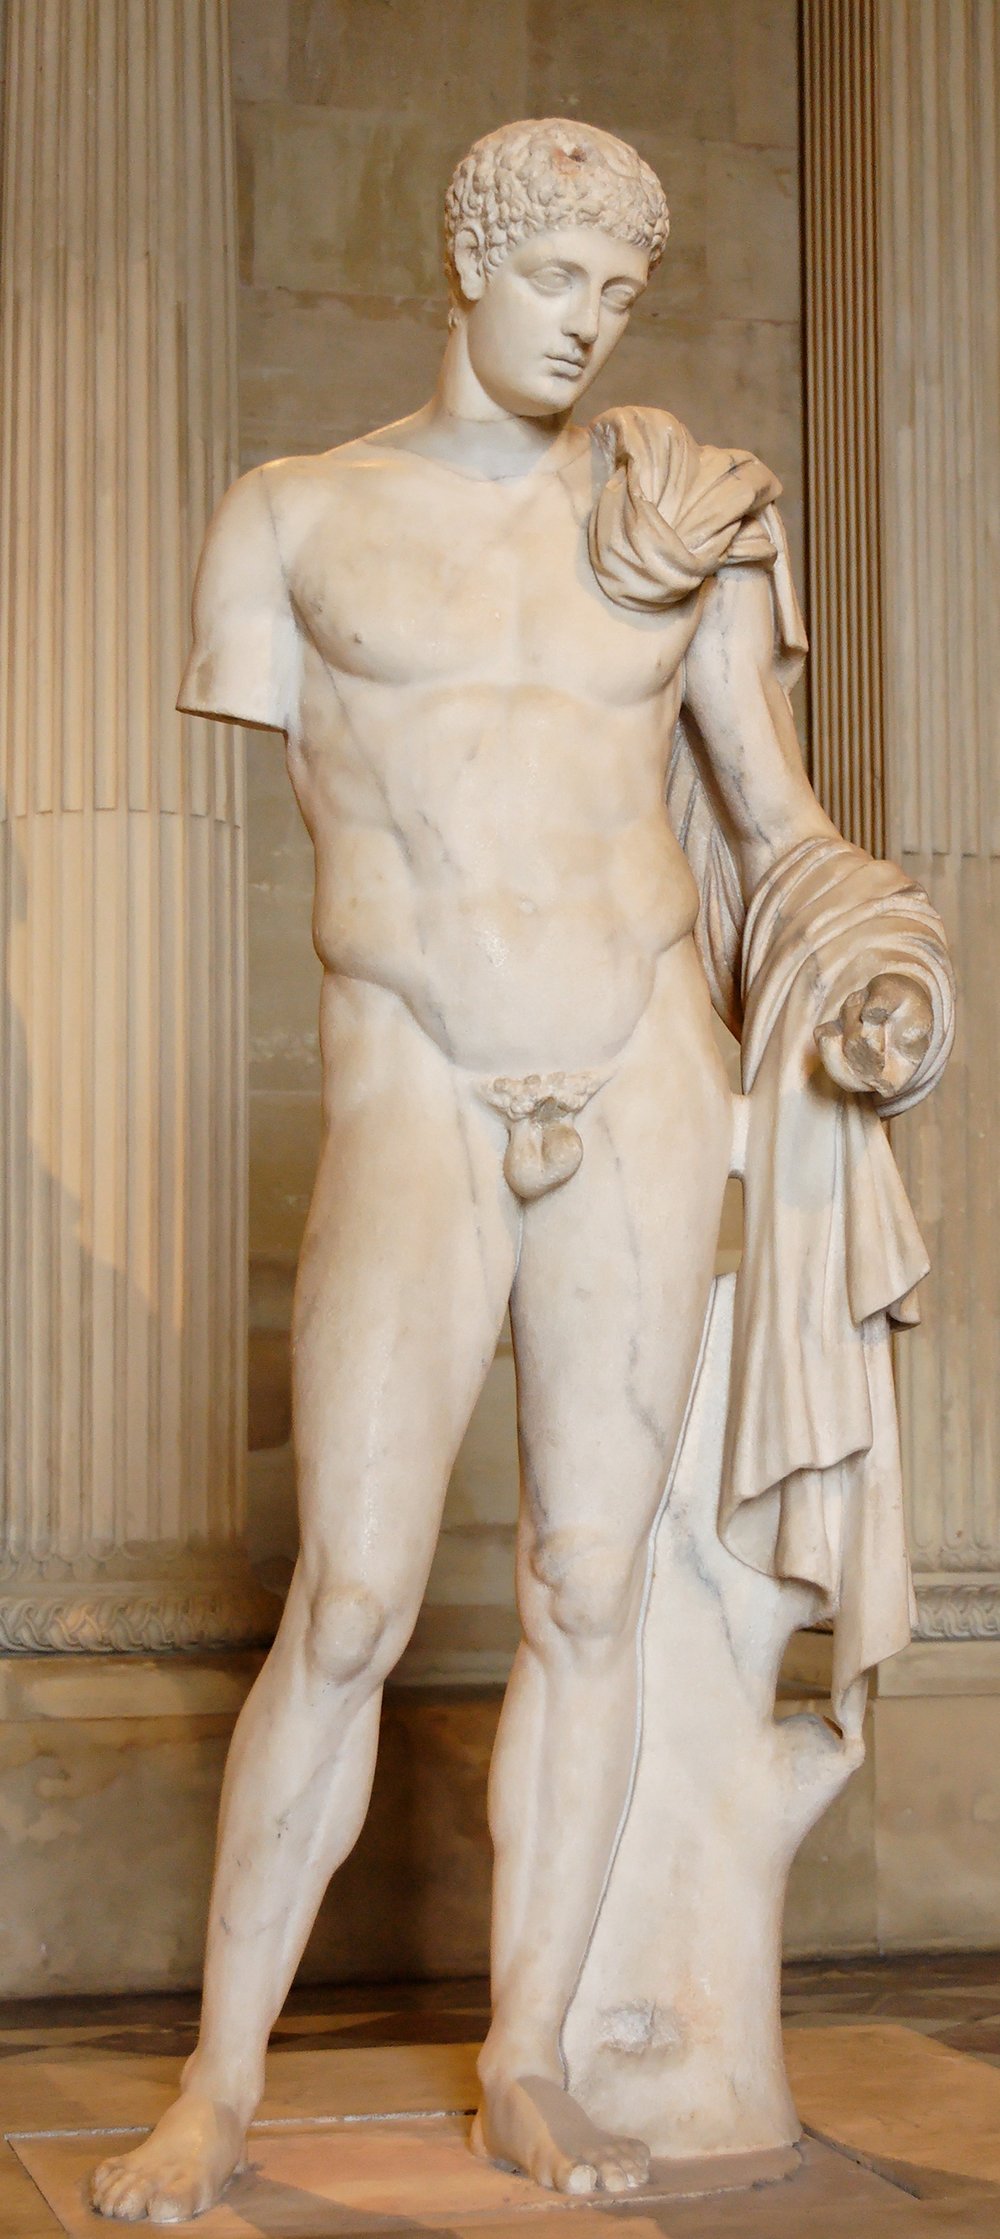 Hermes statue in the Louvre Museum